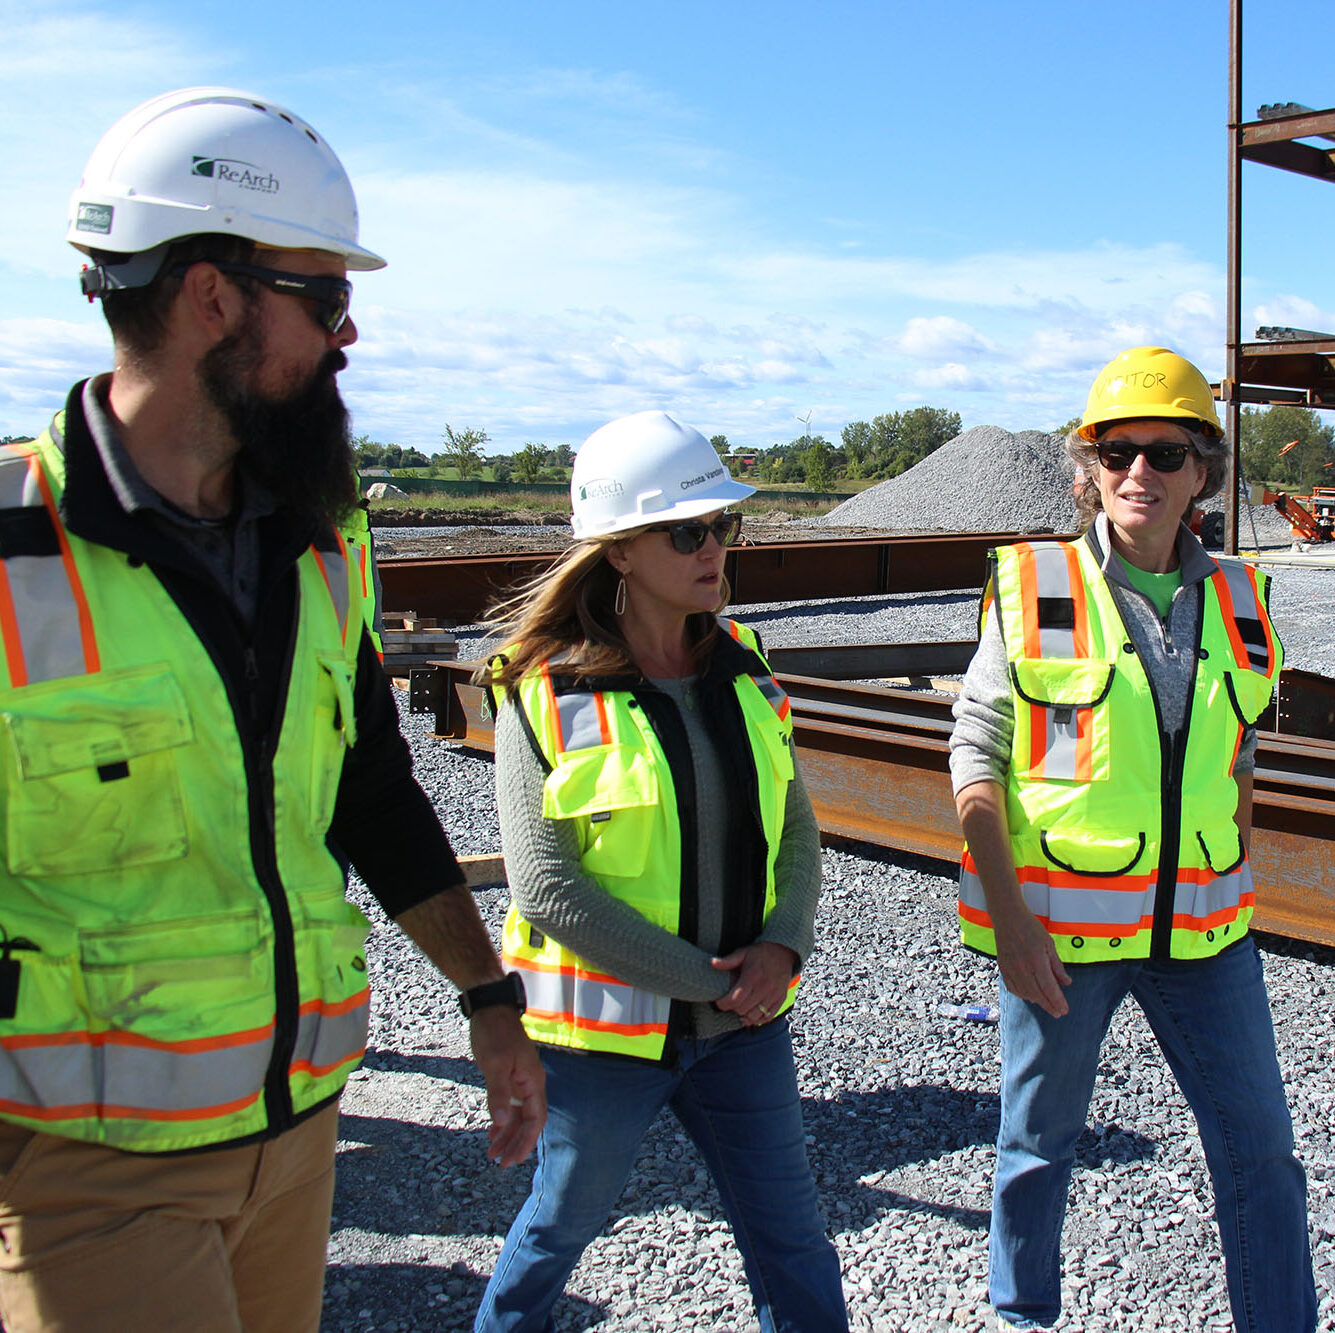 Trailblazer staff member walks with ReArch Construction Company staff at a construction site.